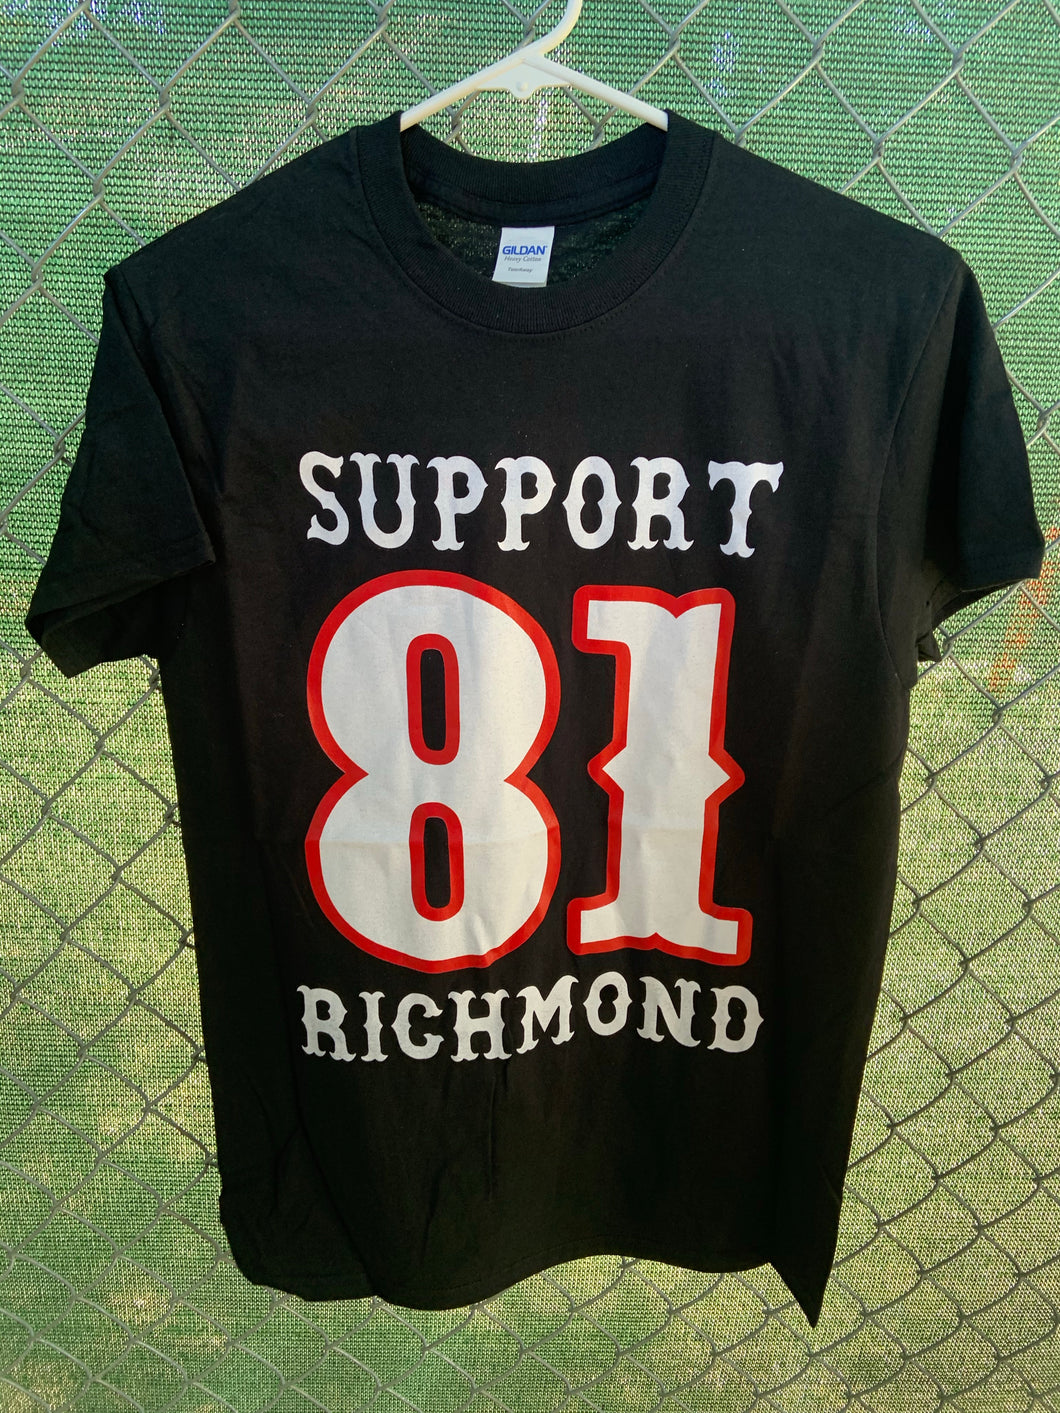 Men’s black sleeve shirt with big support 81 richmond on front